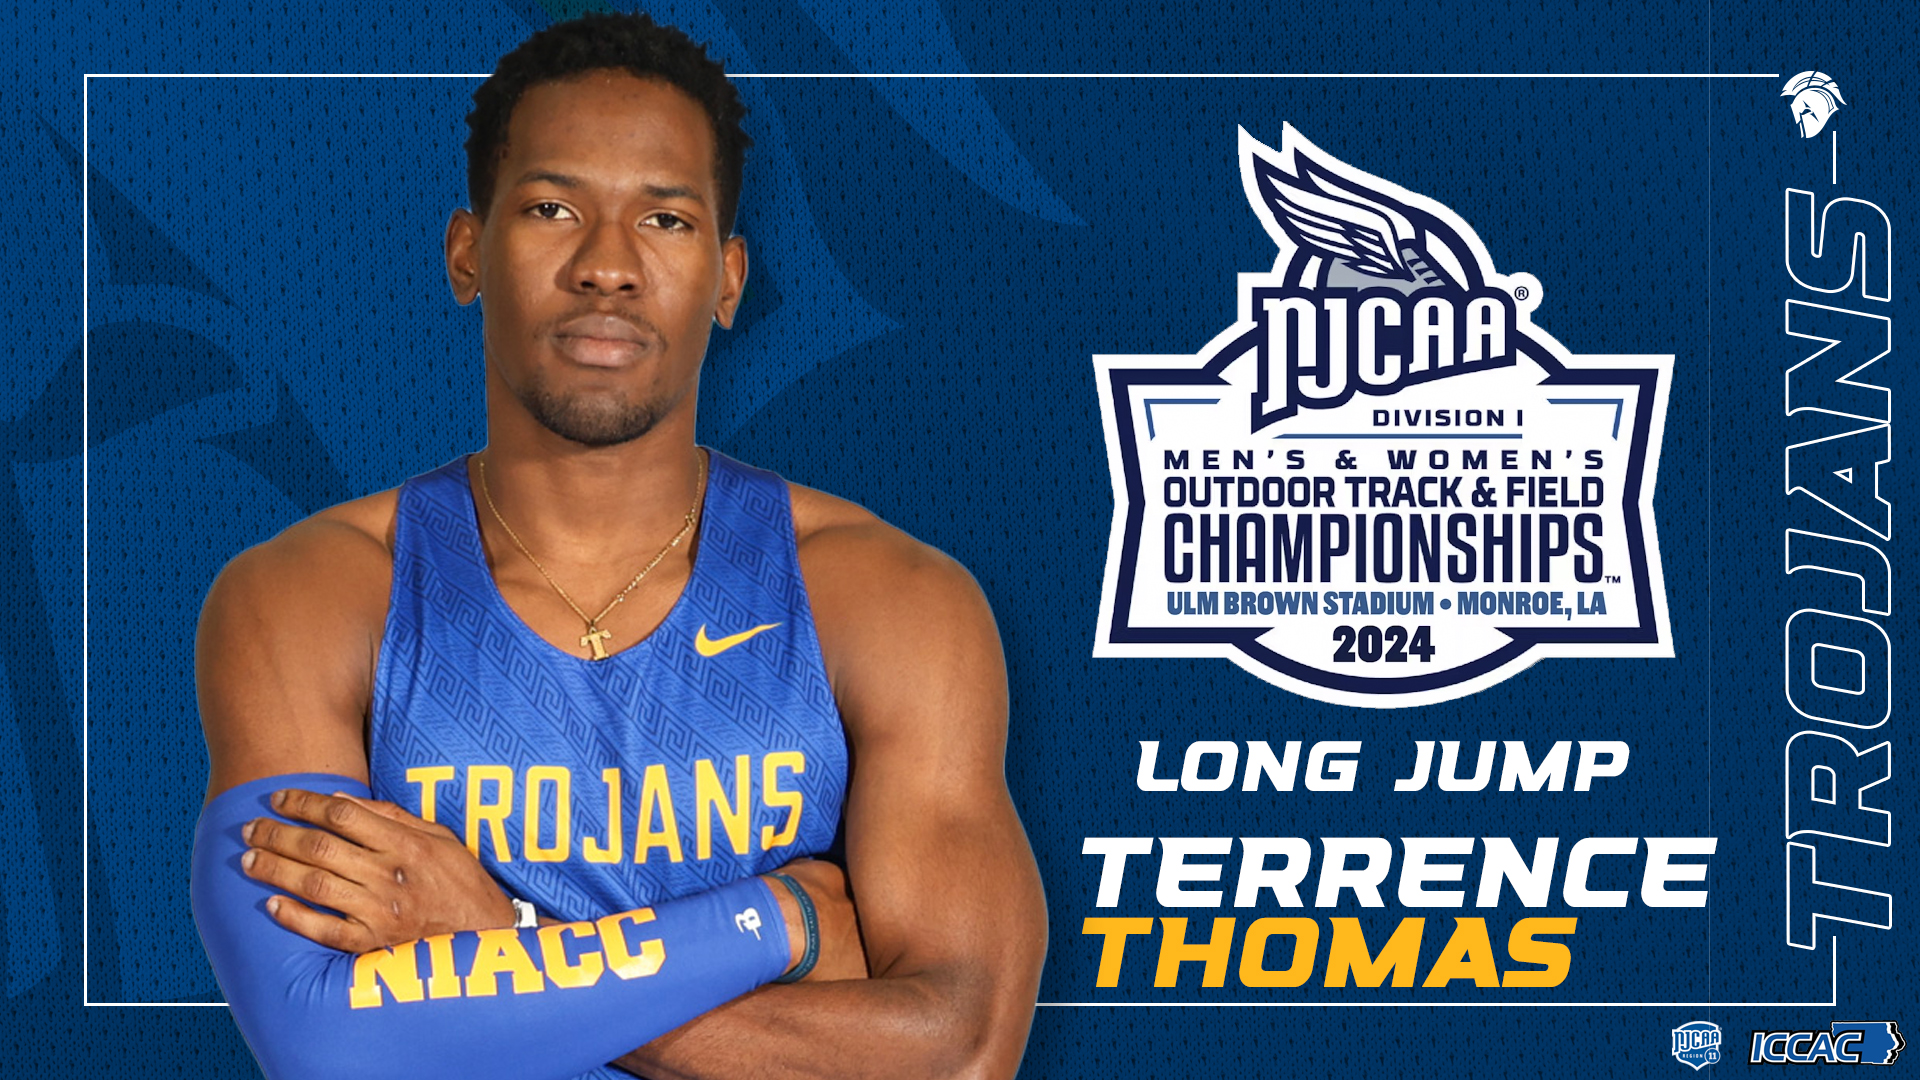 NIACC's Thomas places 3rd in long jump at nationals